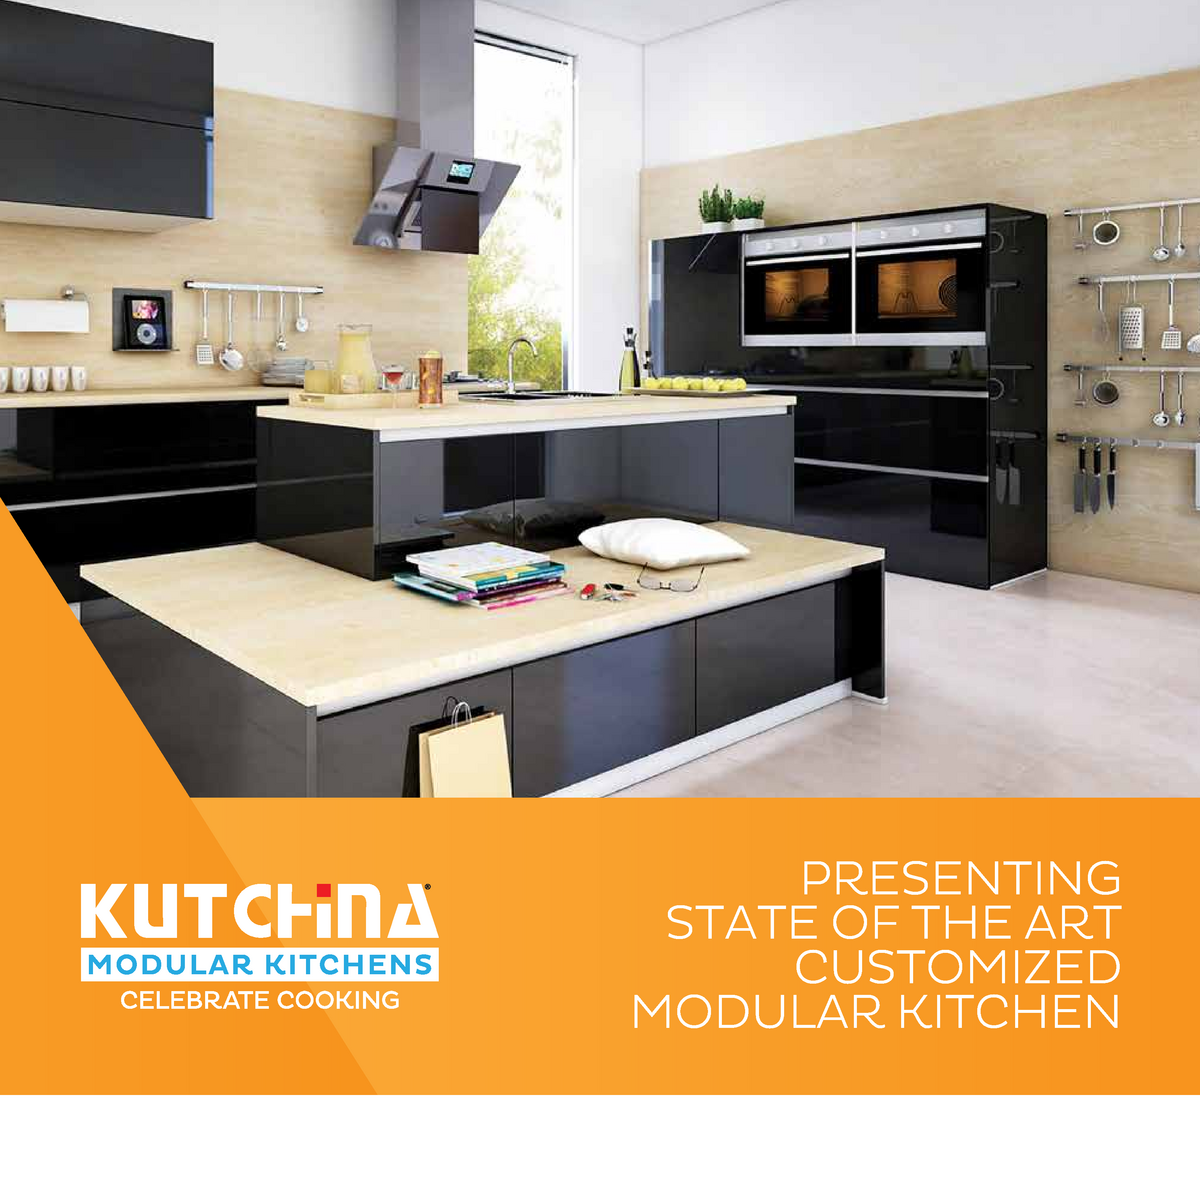 Catalogue modular kitchen primeum   PRESENTING STATE OF THE ART ...